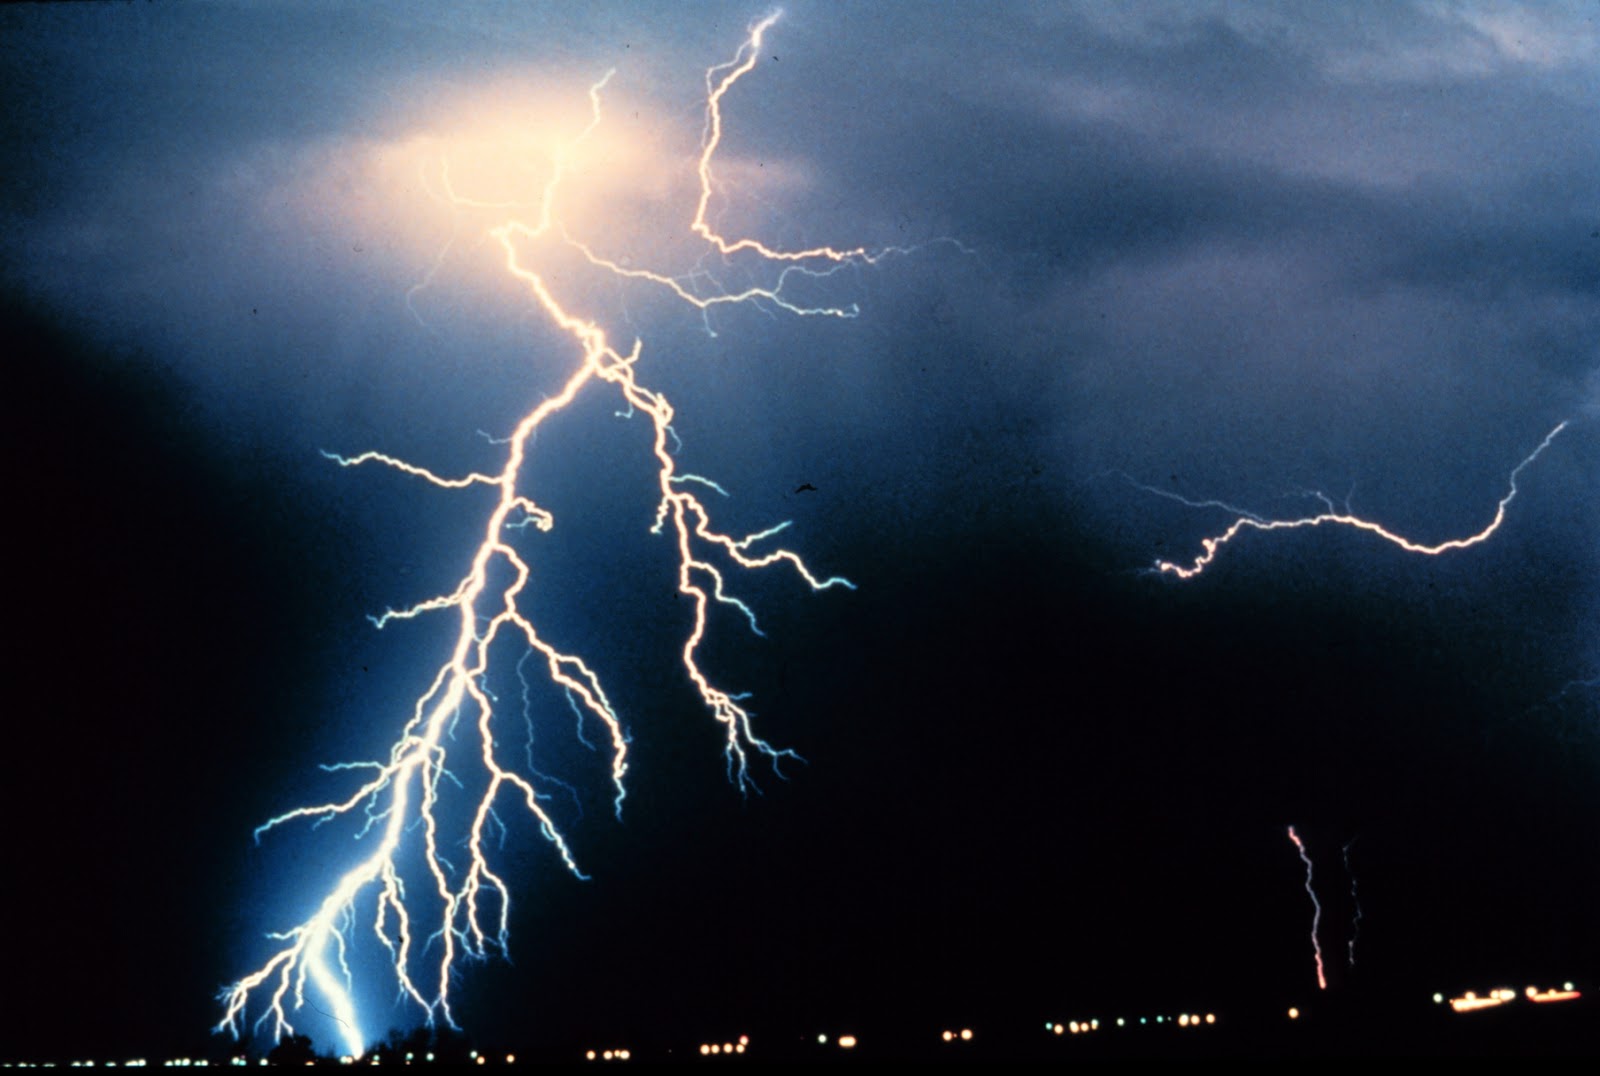 Lightning HD Wallpaper Check Out The Cool